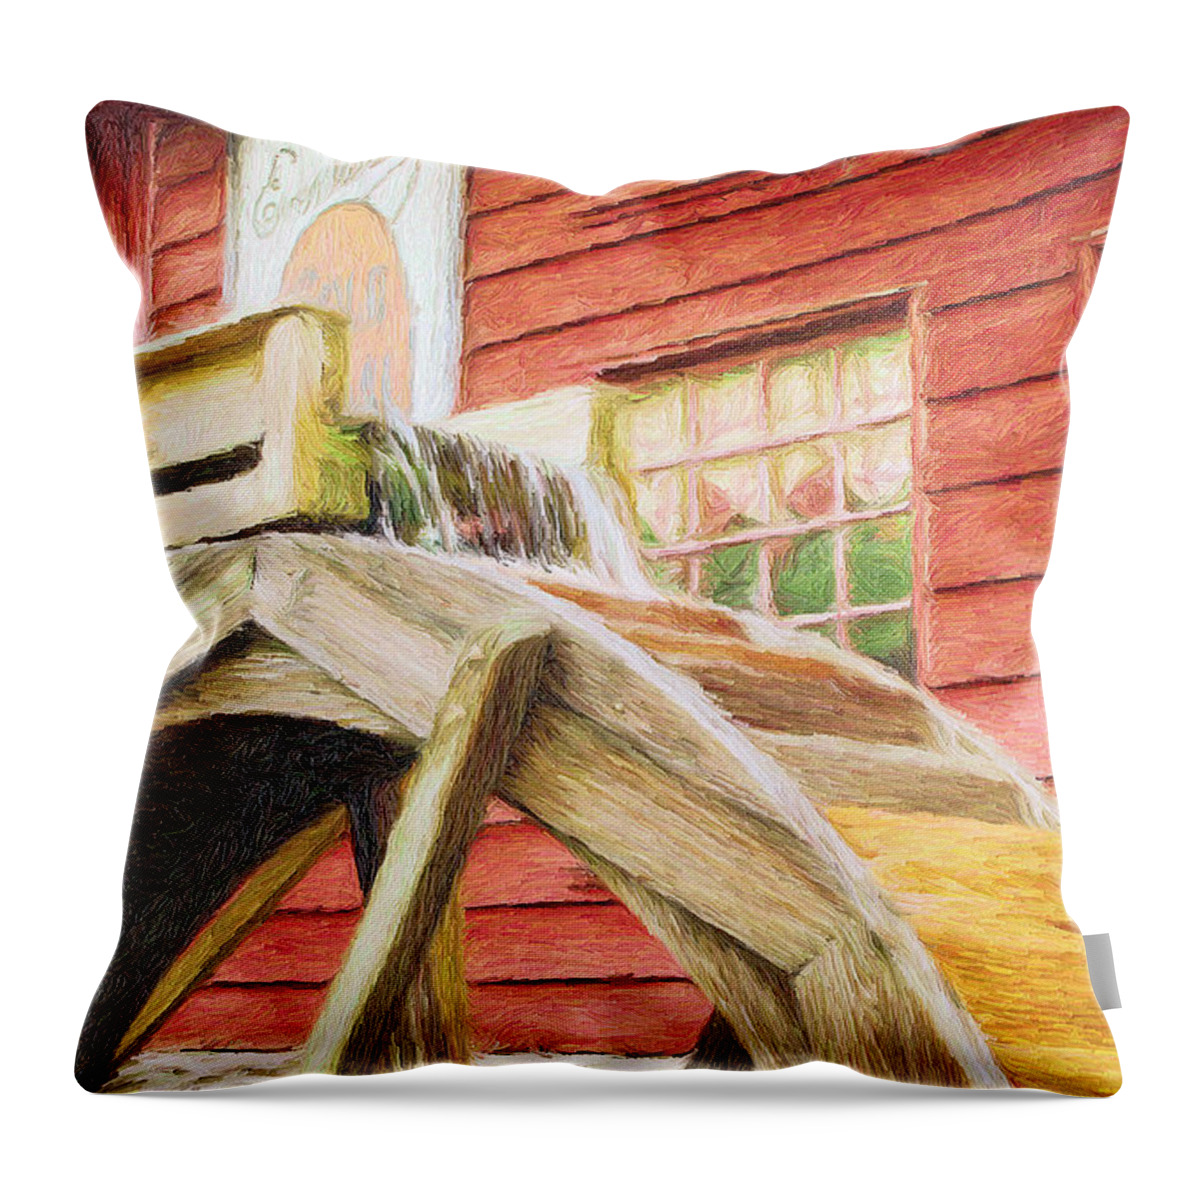 Flour Throw Pillow featuring the painting Down by the Old Mill by Jeffrey Kolker